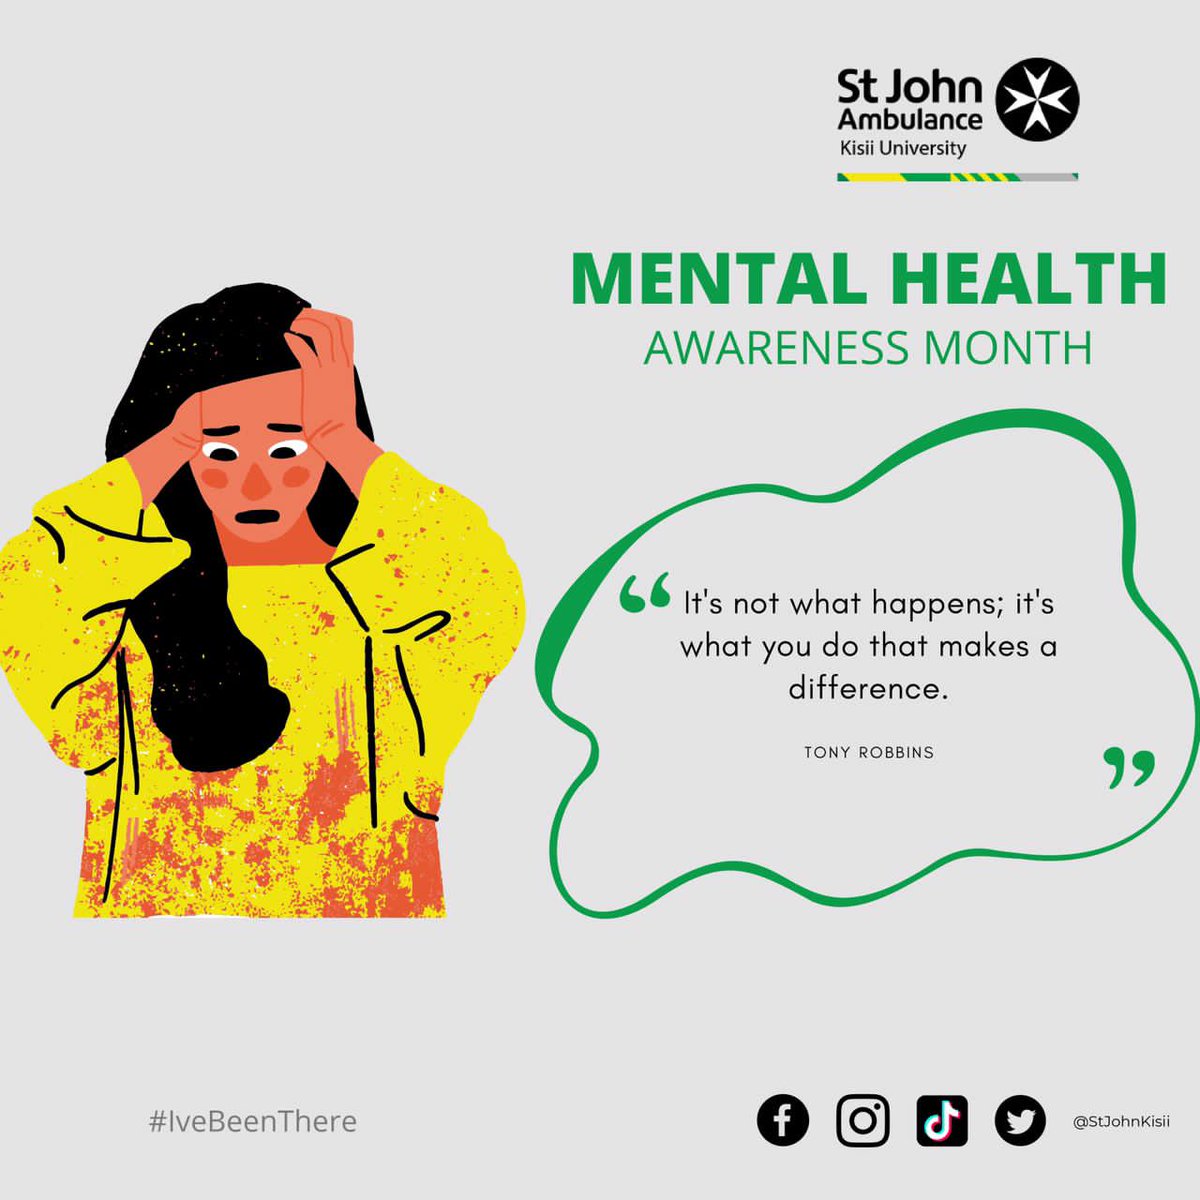 “It’s not what happens; it’s what you do that makes a difference.” ~ Tony Robbins

@StJohnKisii

#StJohnKisii #StJohnPeople #StJohnCares #KisiiUniversity #IveBeenThere #MentalHealth #MentalHealthAwareness